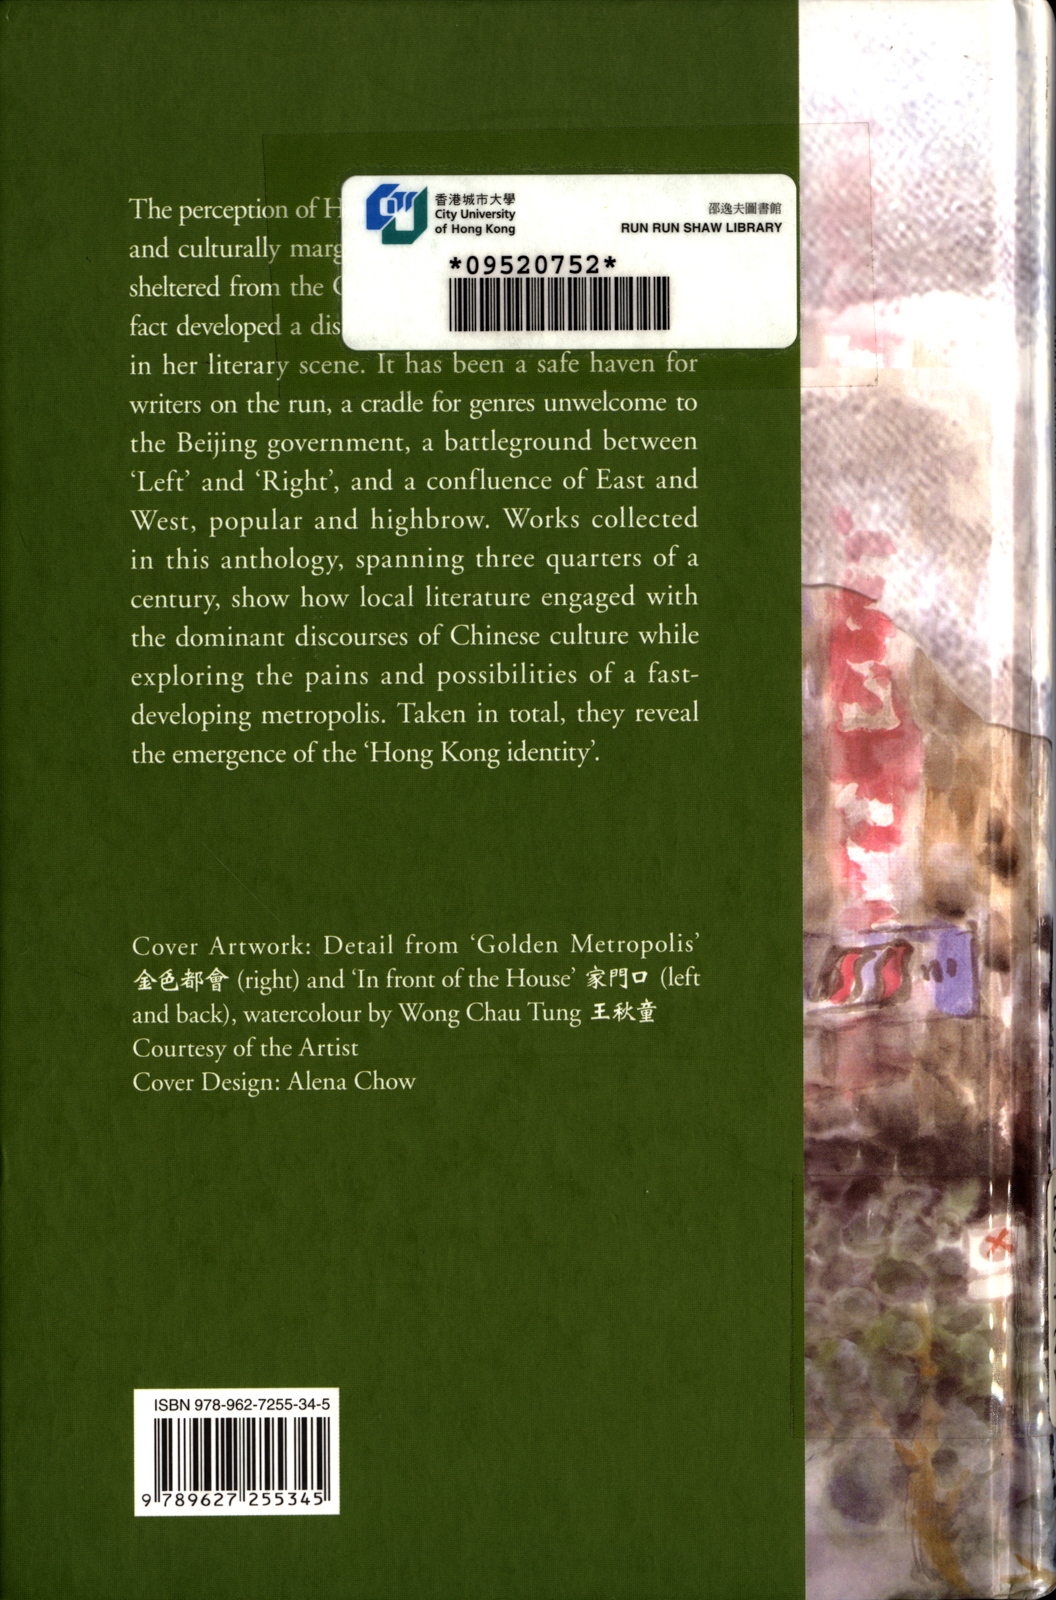 To Pierce the Material Screen: An Anthology of 20th-Century Hong Kong Literature, Volume I, Fiction